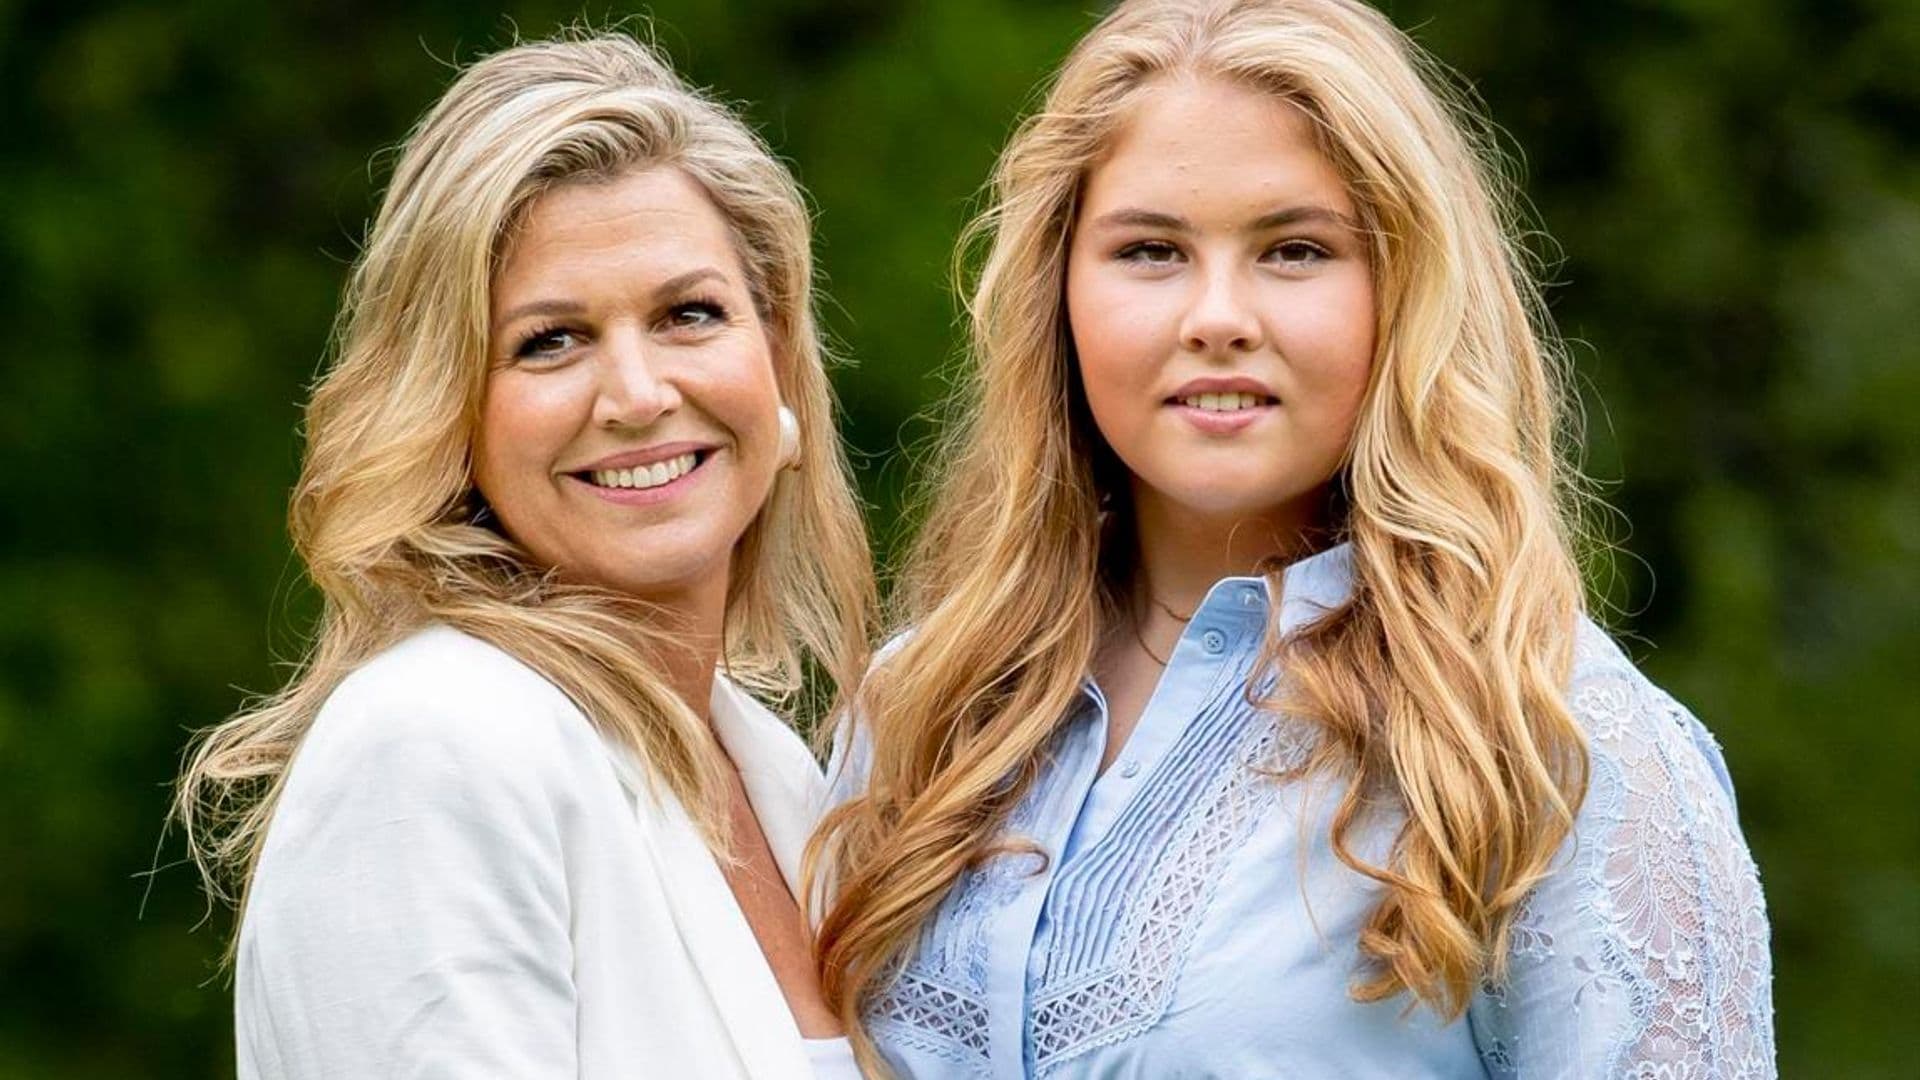 Queen Maxima’s family pose for annual summer photocall and hint at Princess Amalia’s future plans